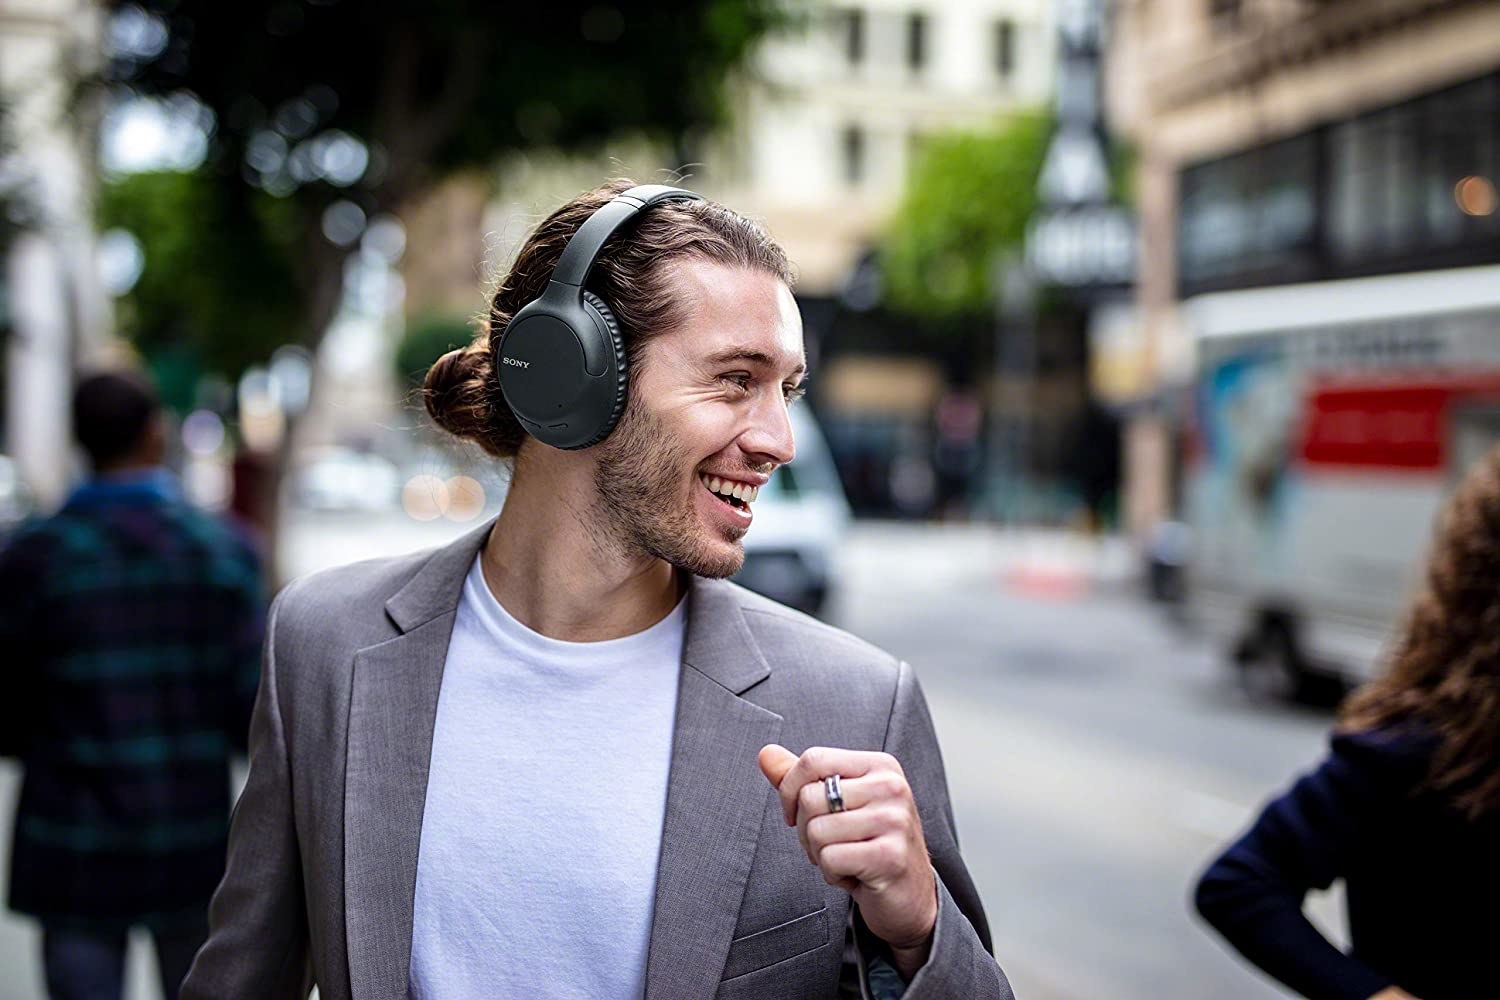 A person walking down the street with a pair of over-ear headphones on